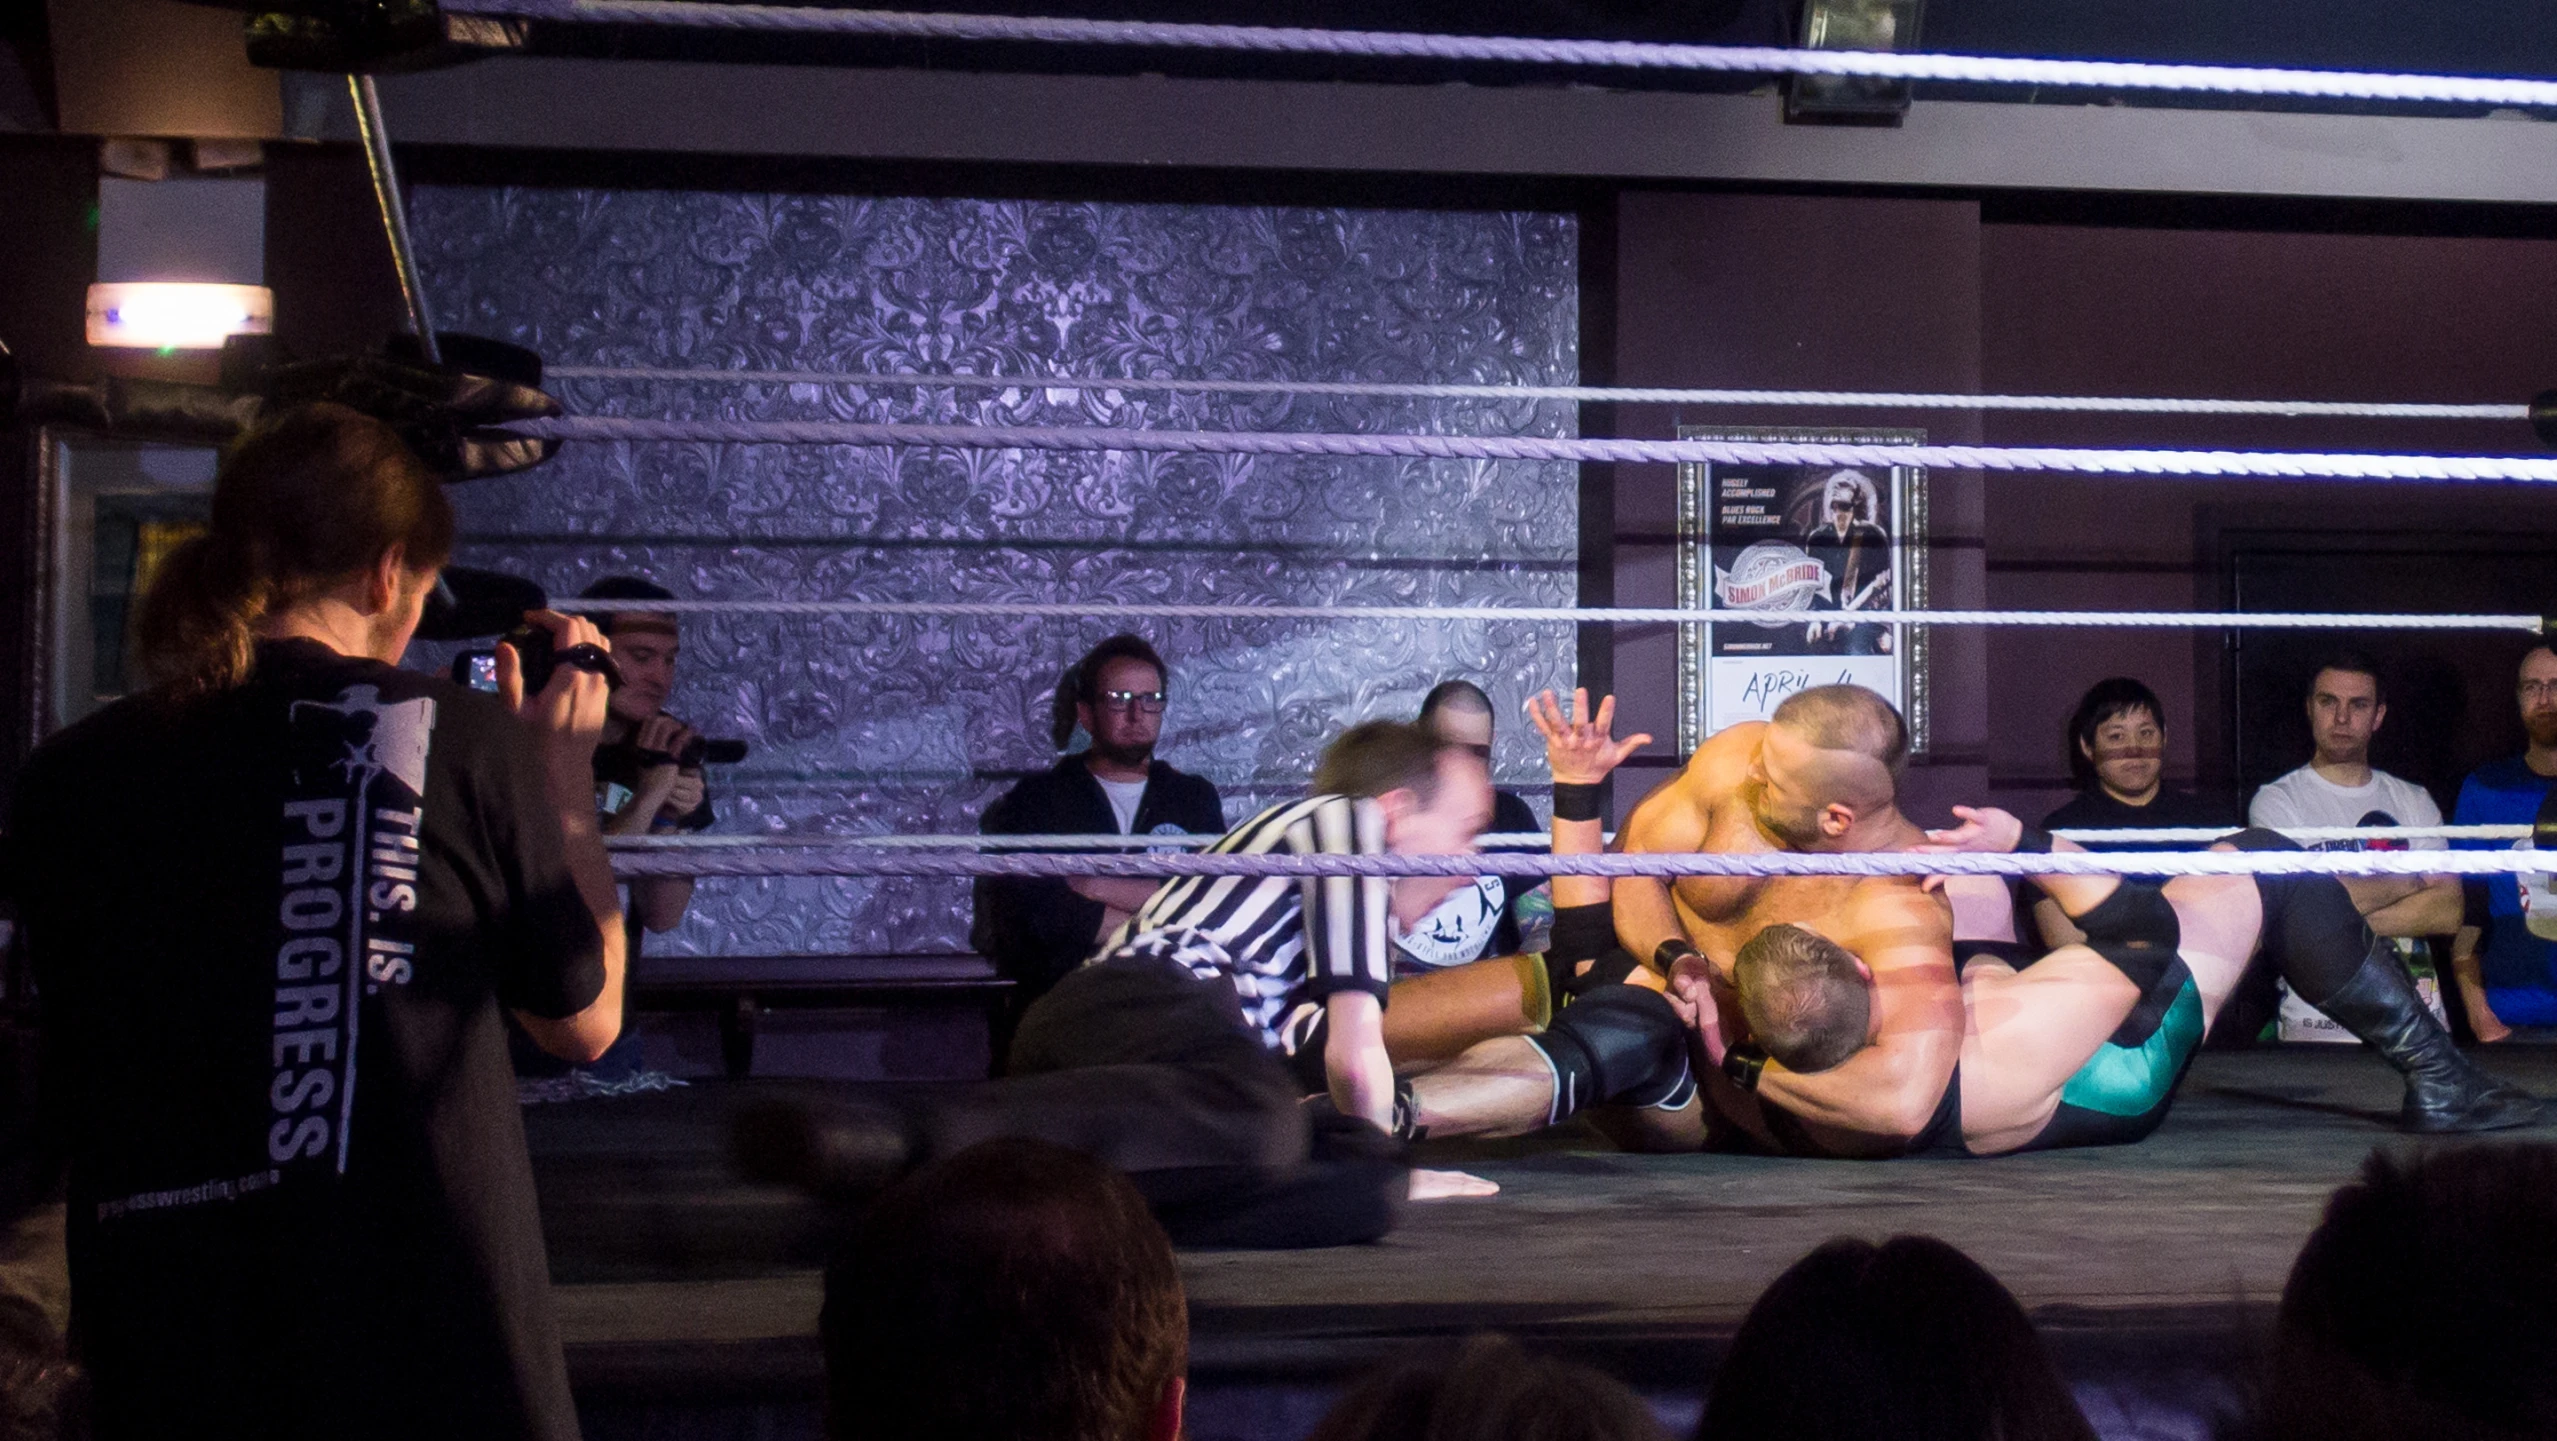 two people wrestling while an audience looks on